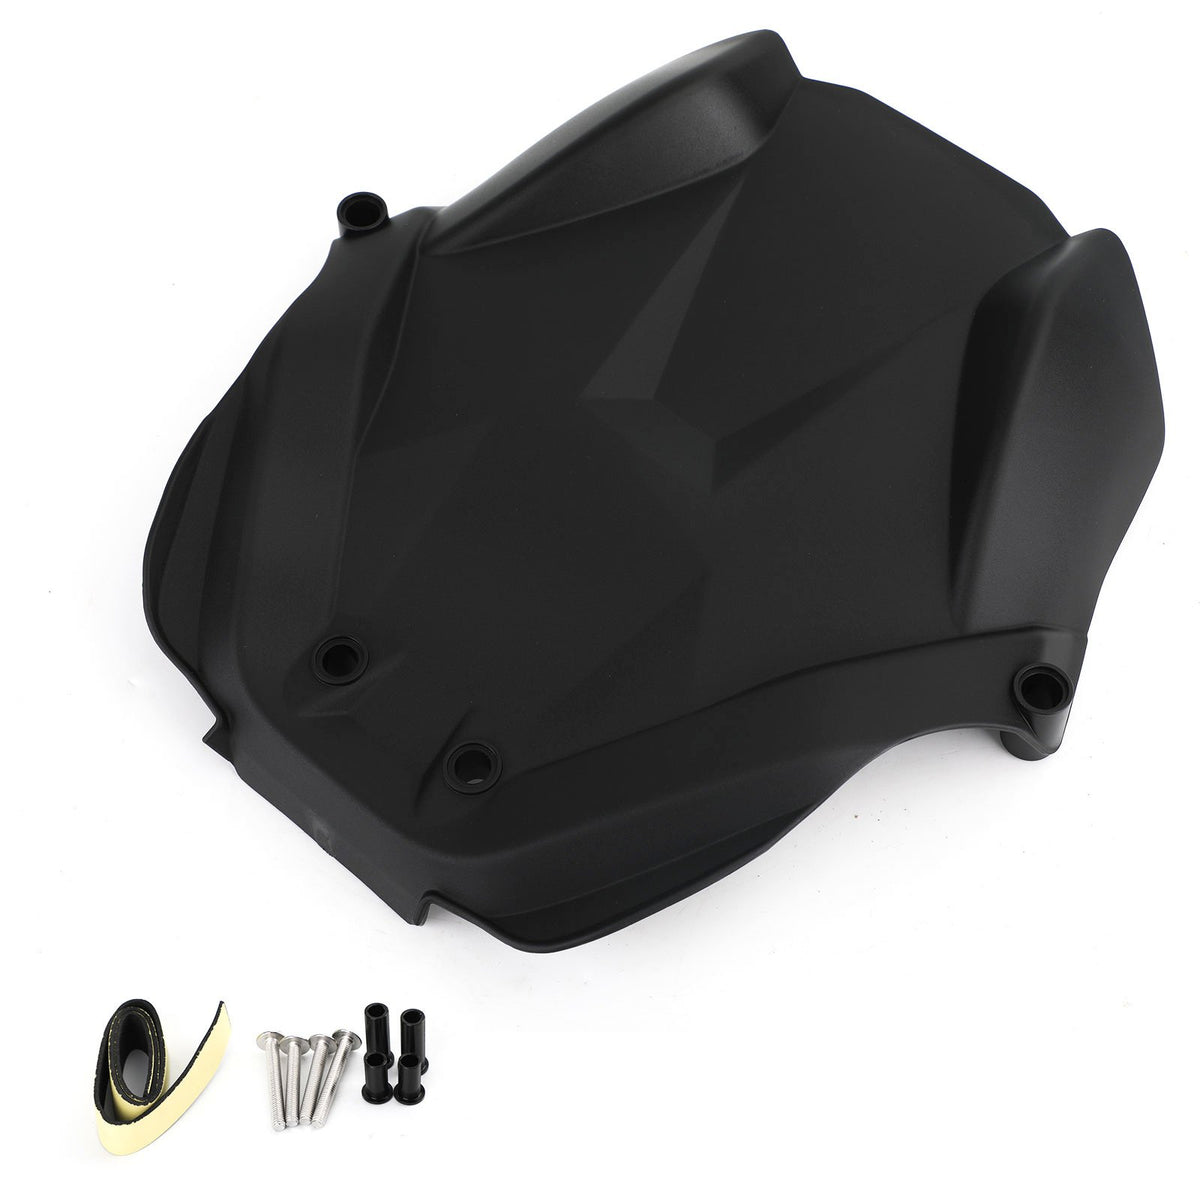 BMW Front Engine Cover Guard Fit For BMW  R1200RT LC Adv 14-18 R1200GS LC 13-18 R1250RT R1250RS R1250R 2019-2020 Black